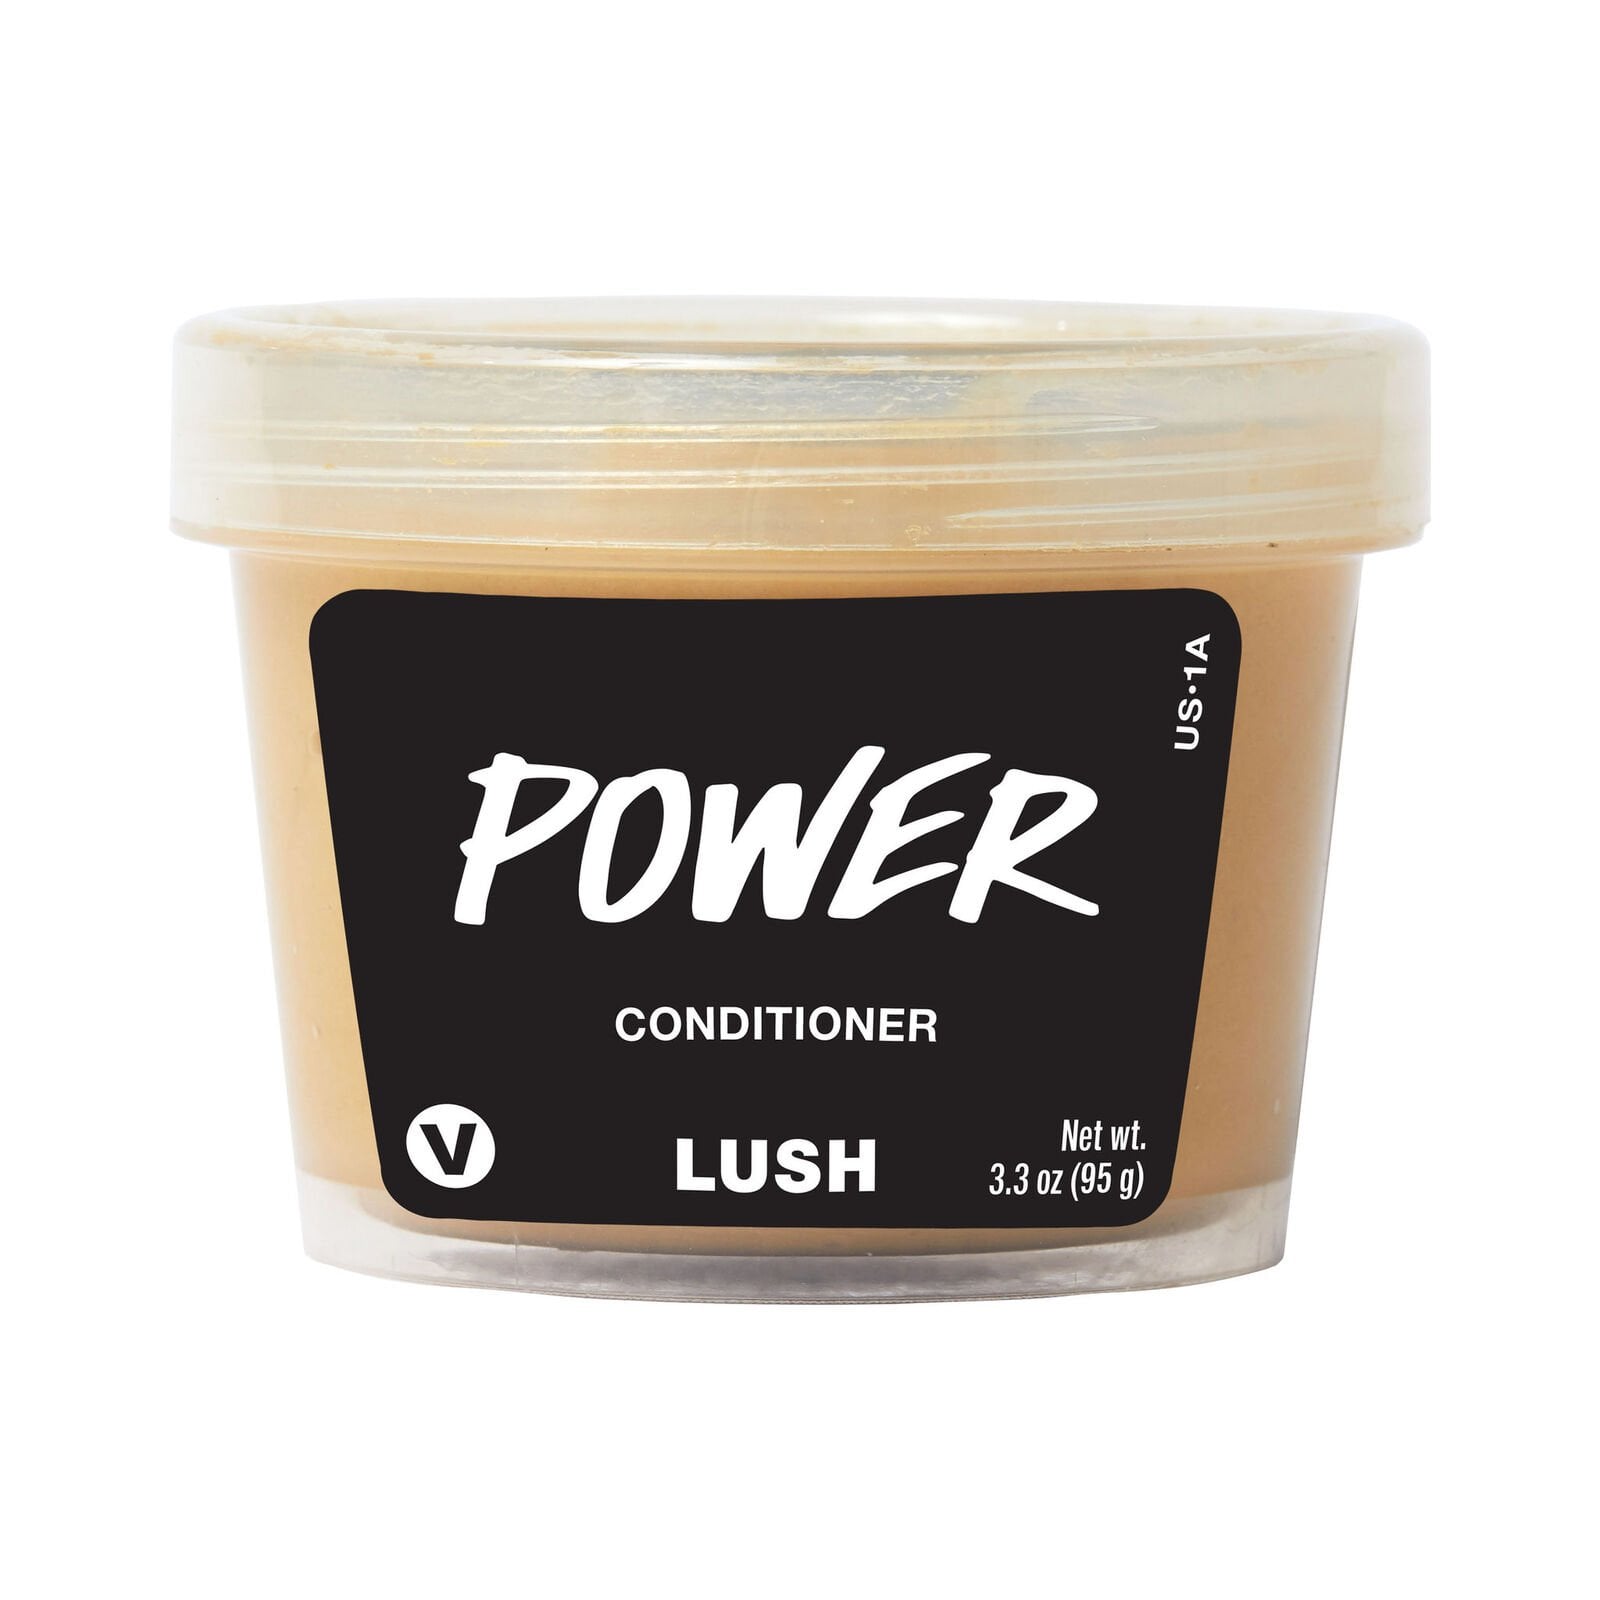 Lush Curls, Coils, and Texture Collection Review | POPSUGAR Beauty